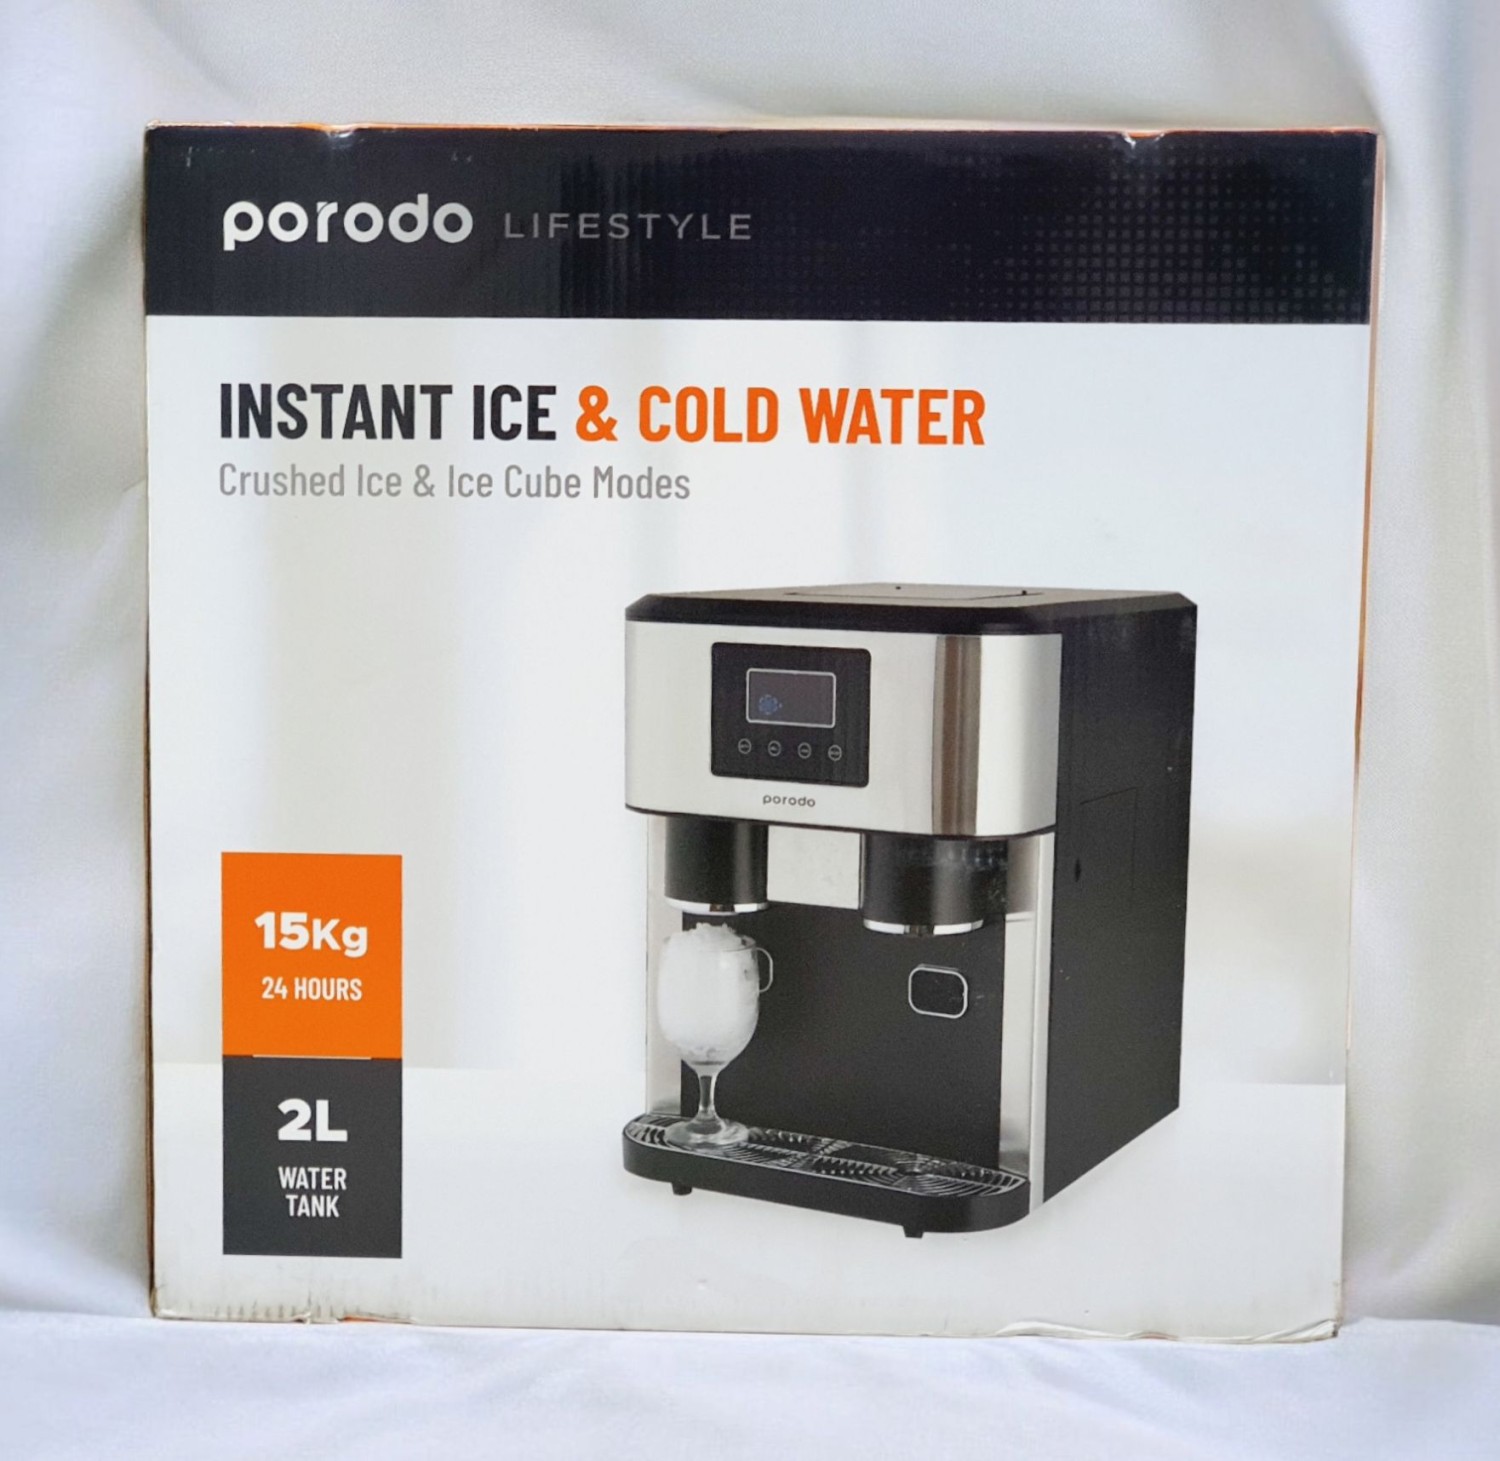 Porodo Lifestyle Instant Ice & Cold Water